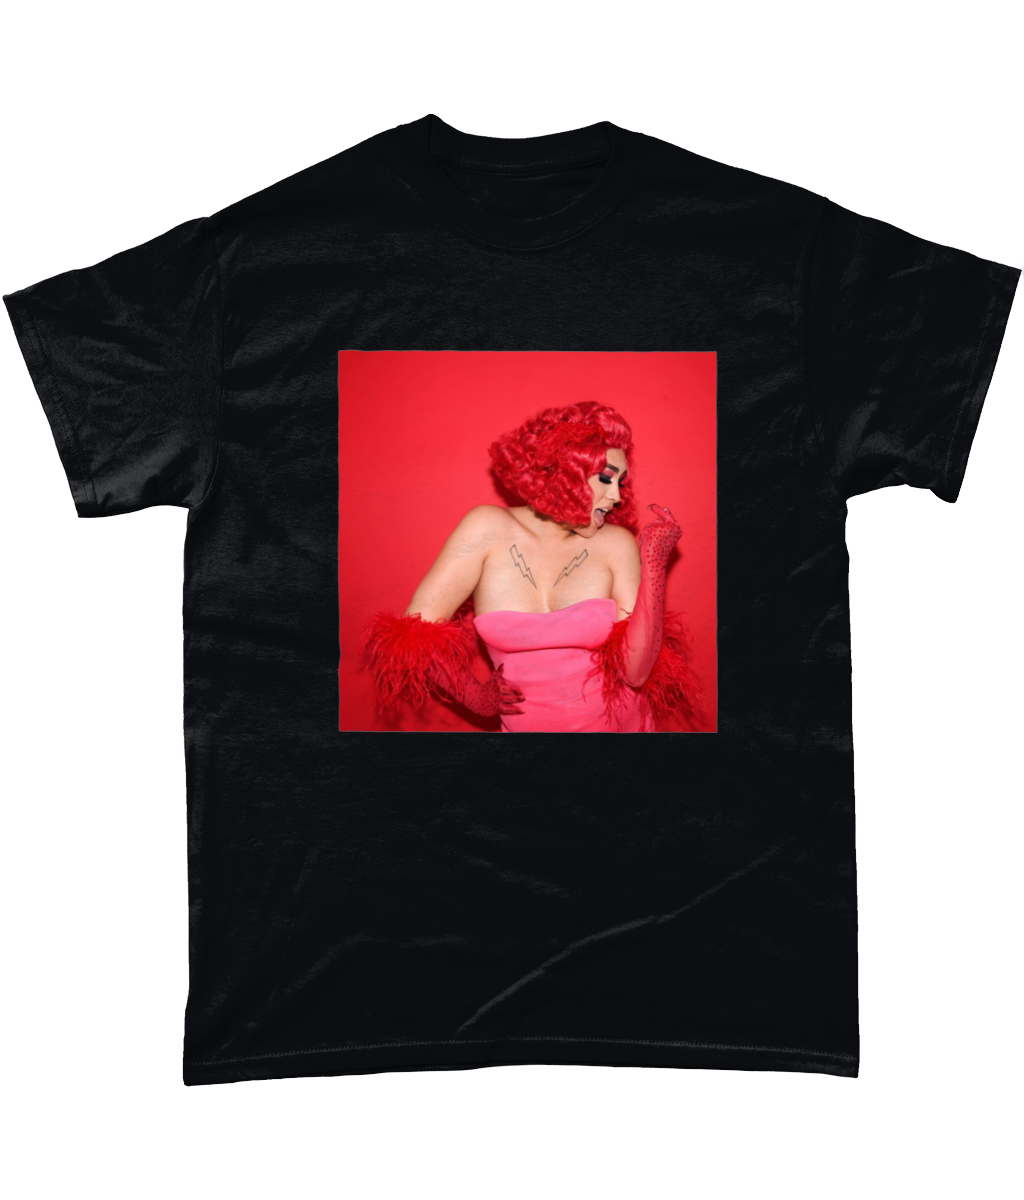 Quanah Style - 'Go Off' T-Shirt - SNATCHED MERCH